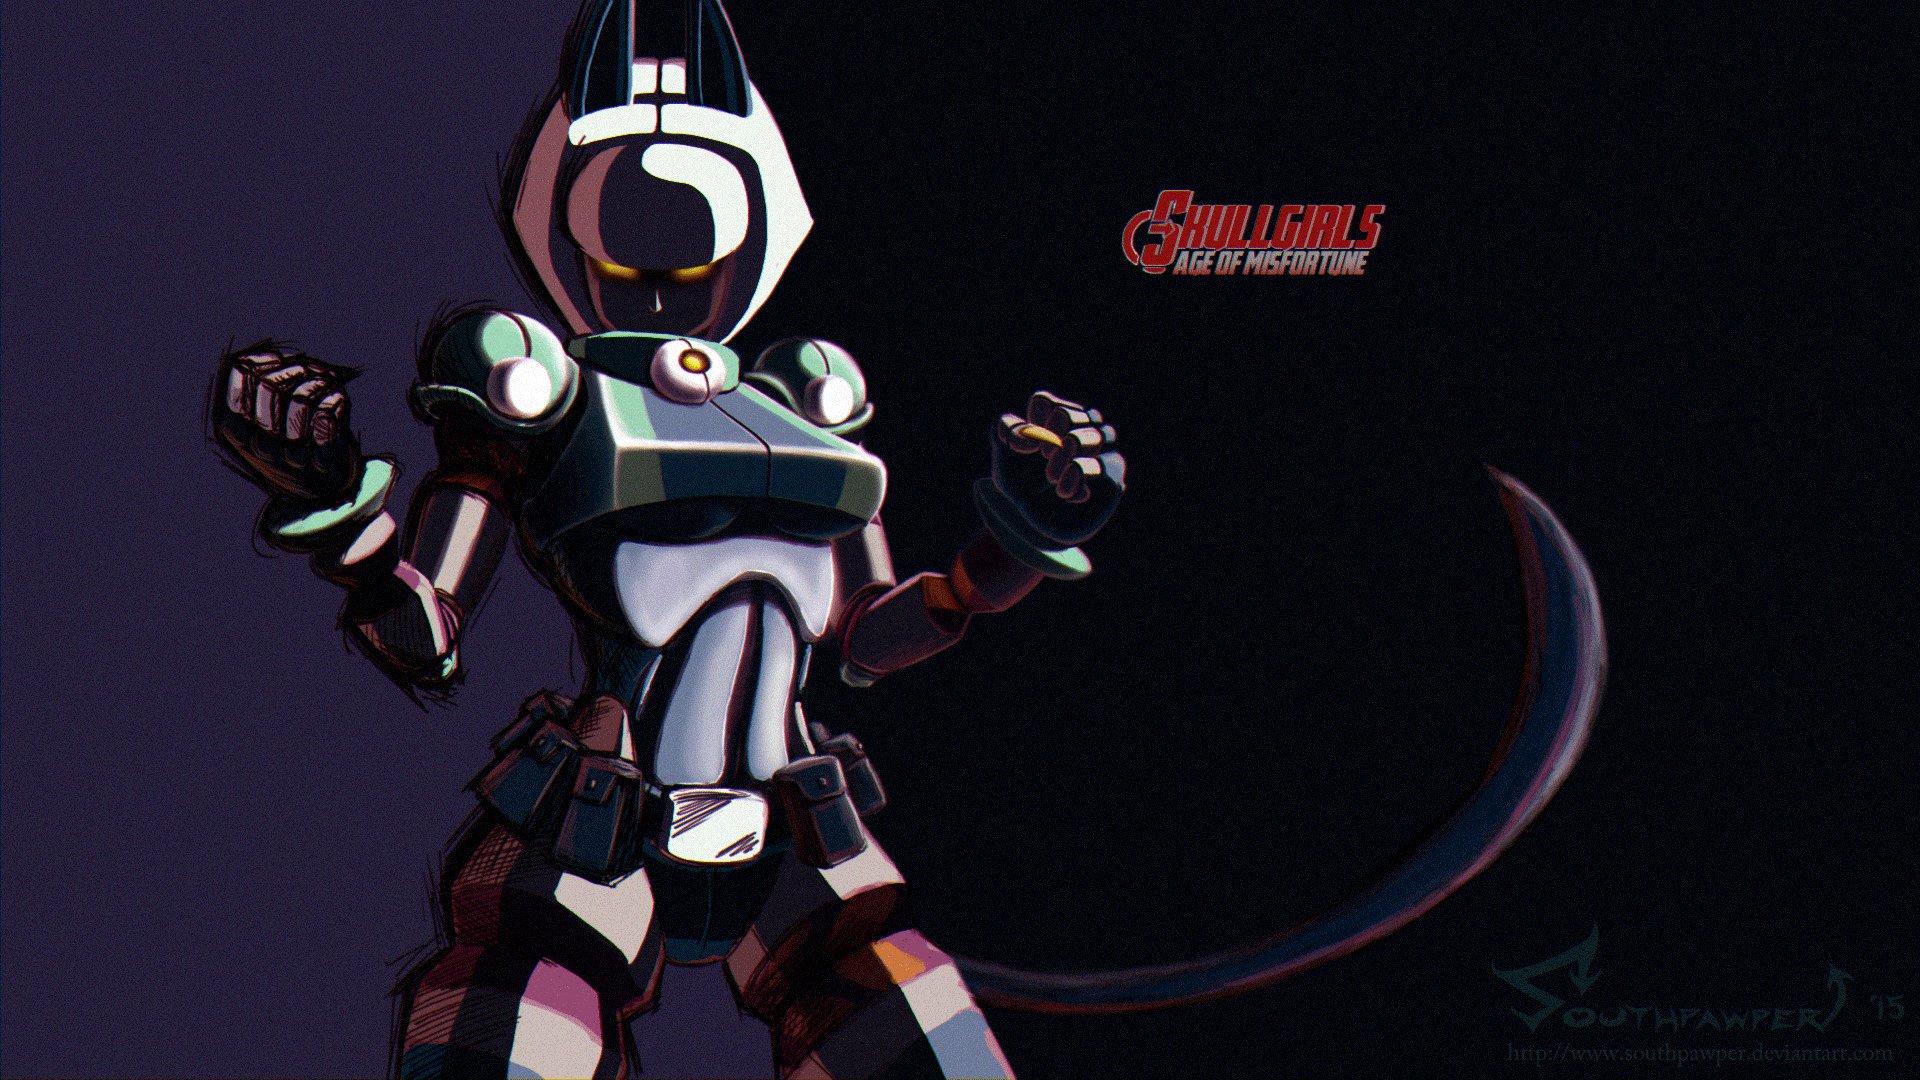 age_of_robo_fortune_by_southpawper-d8uade5.gif